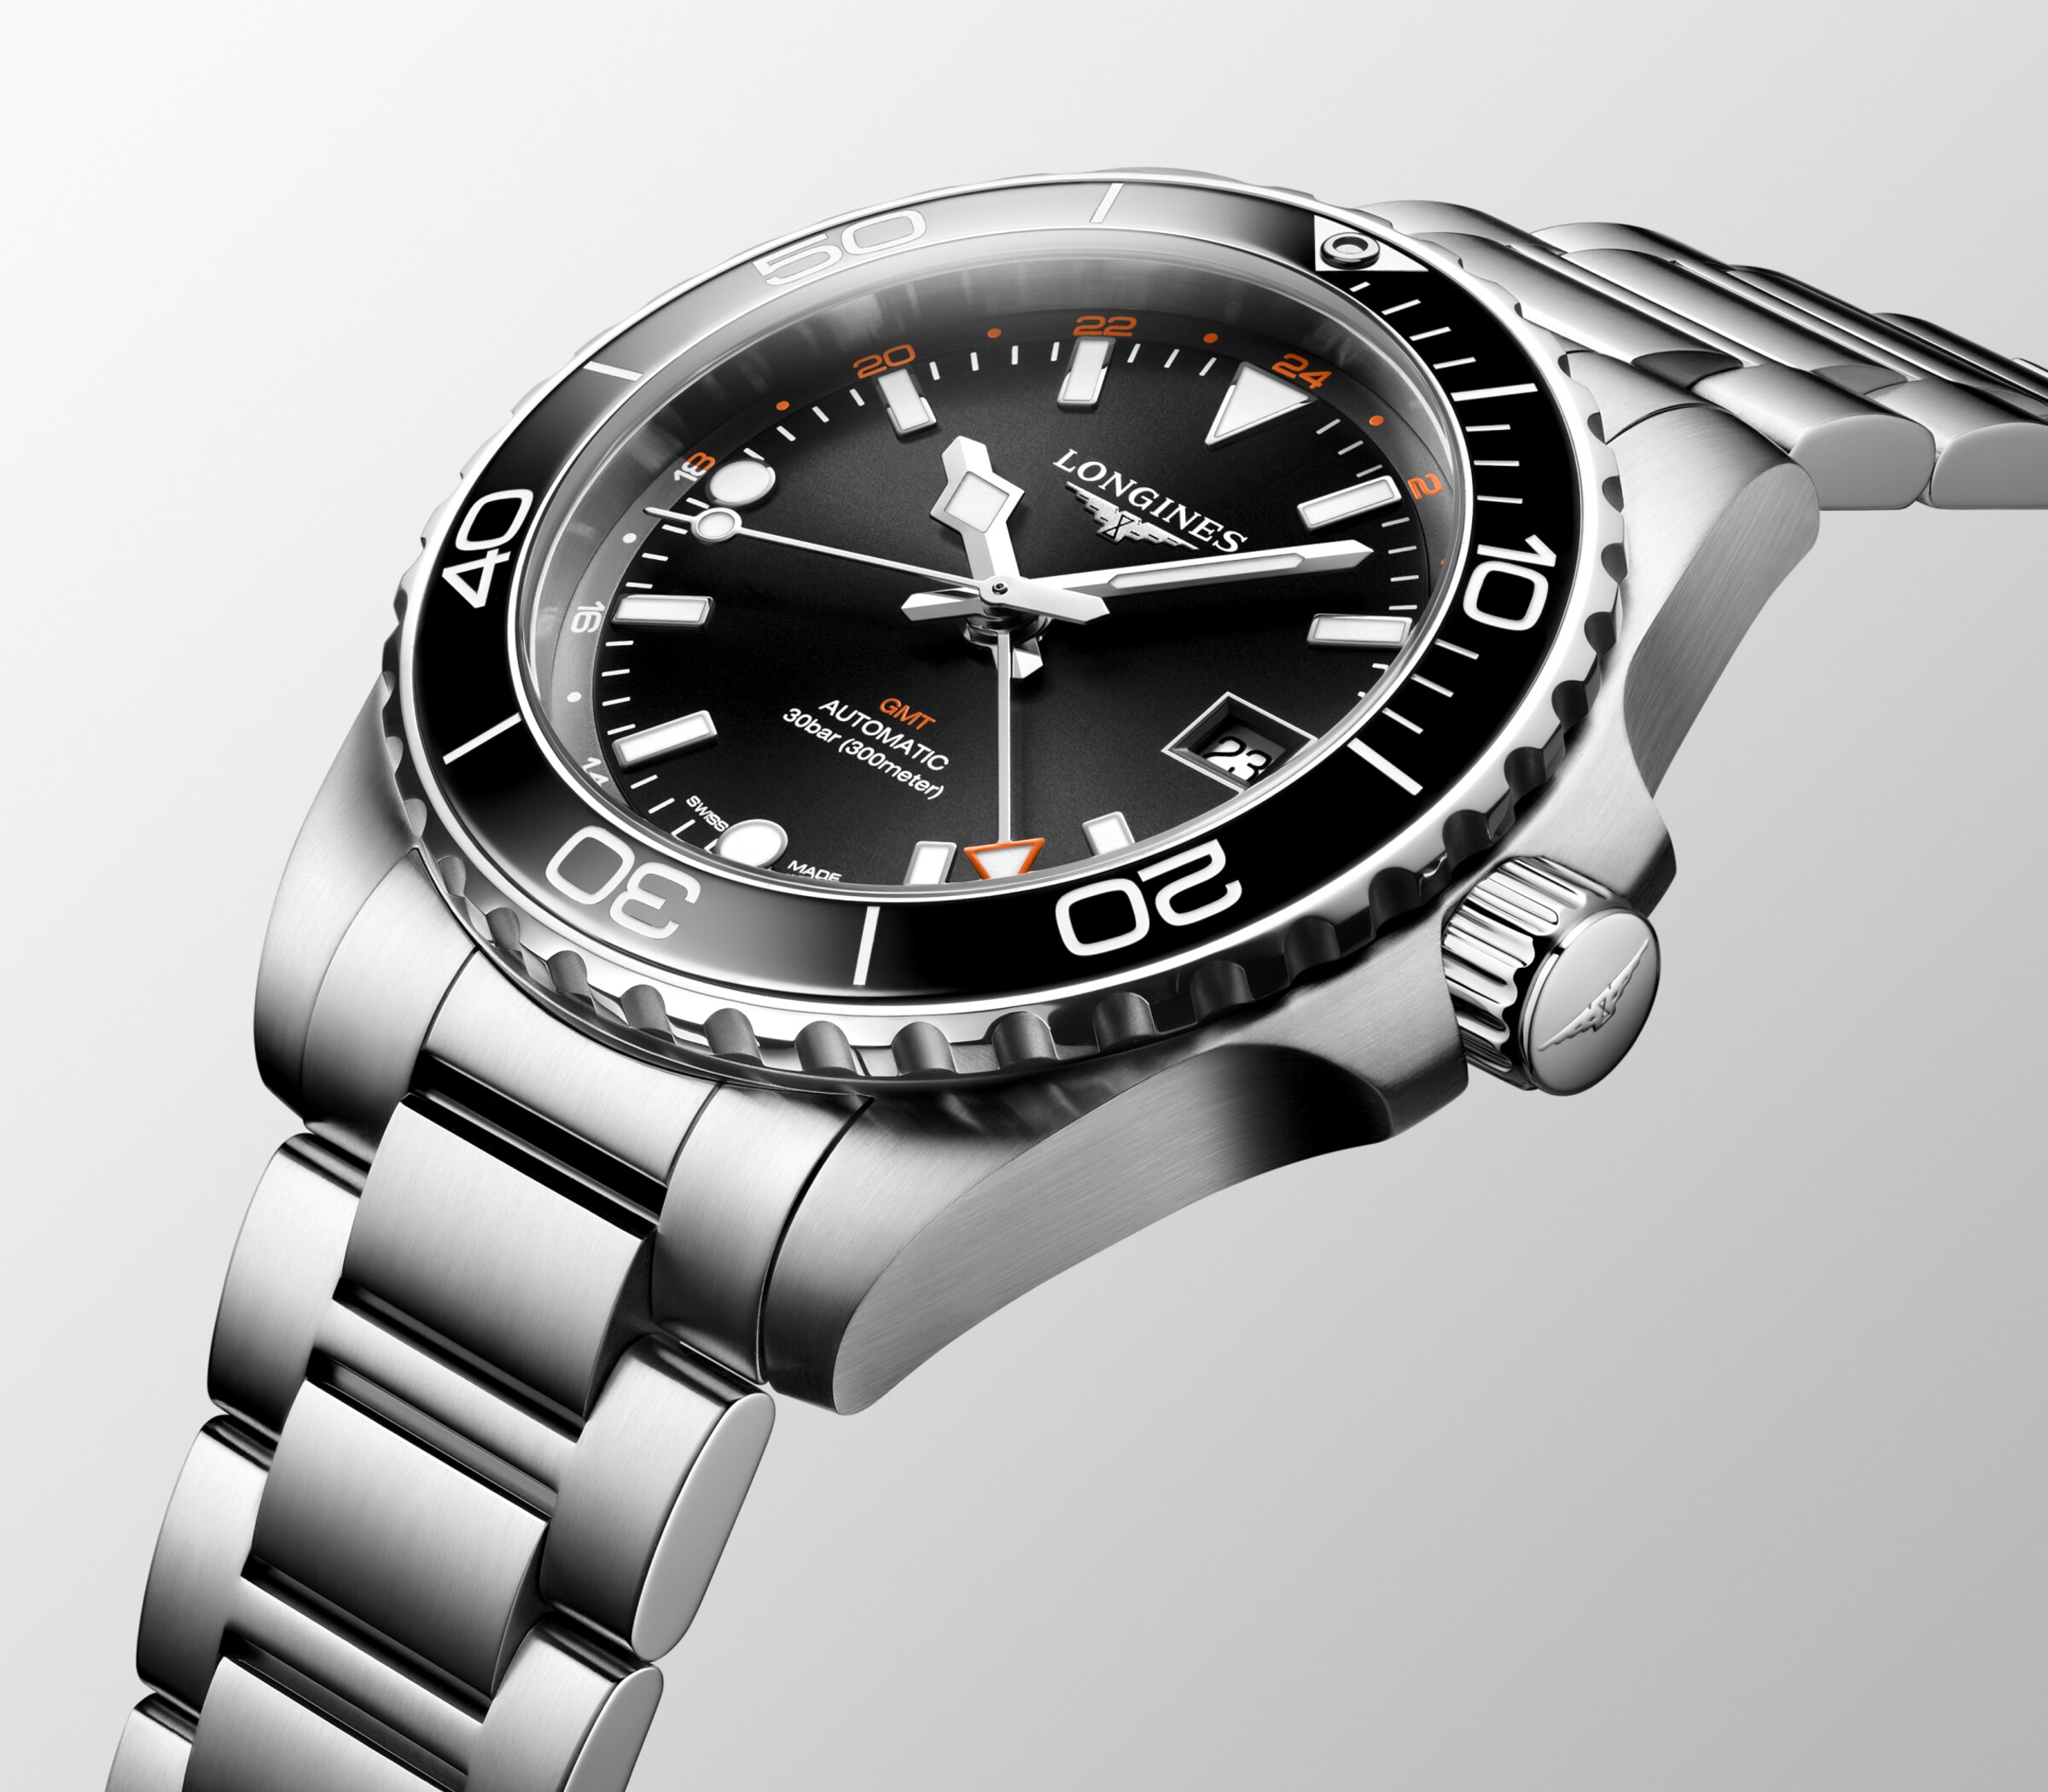 Longines HYDROCONQUEST Automatic Stainless steel and ceramic bezel Watch - L3.790.4.56.6